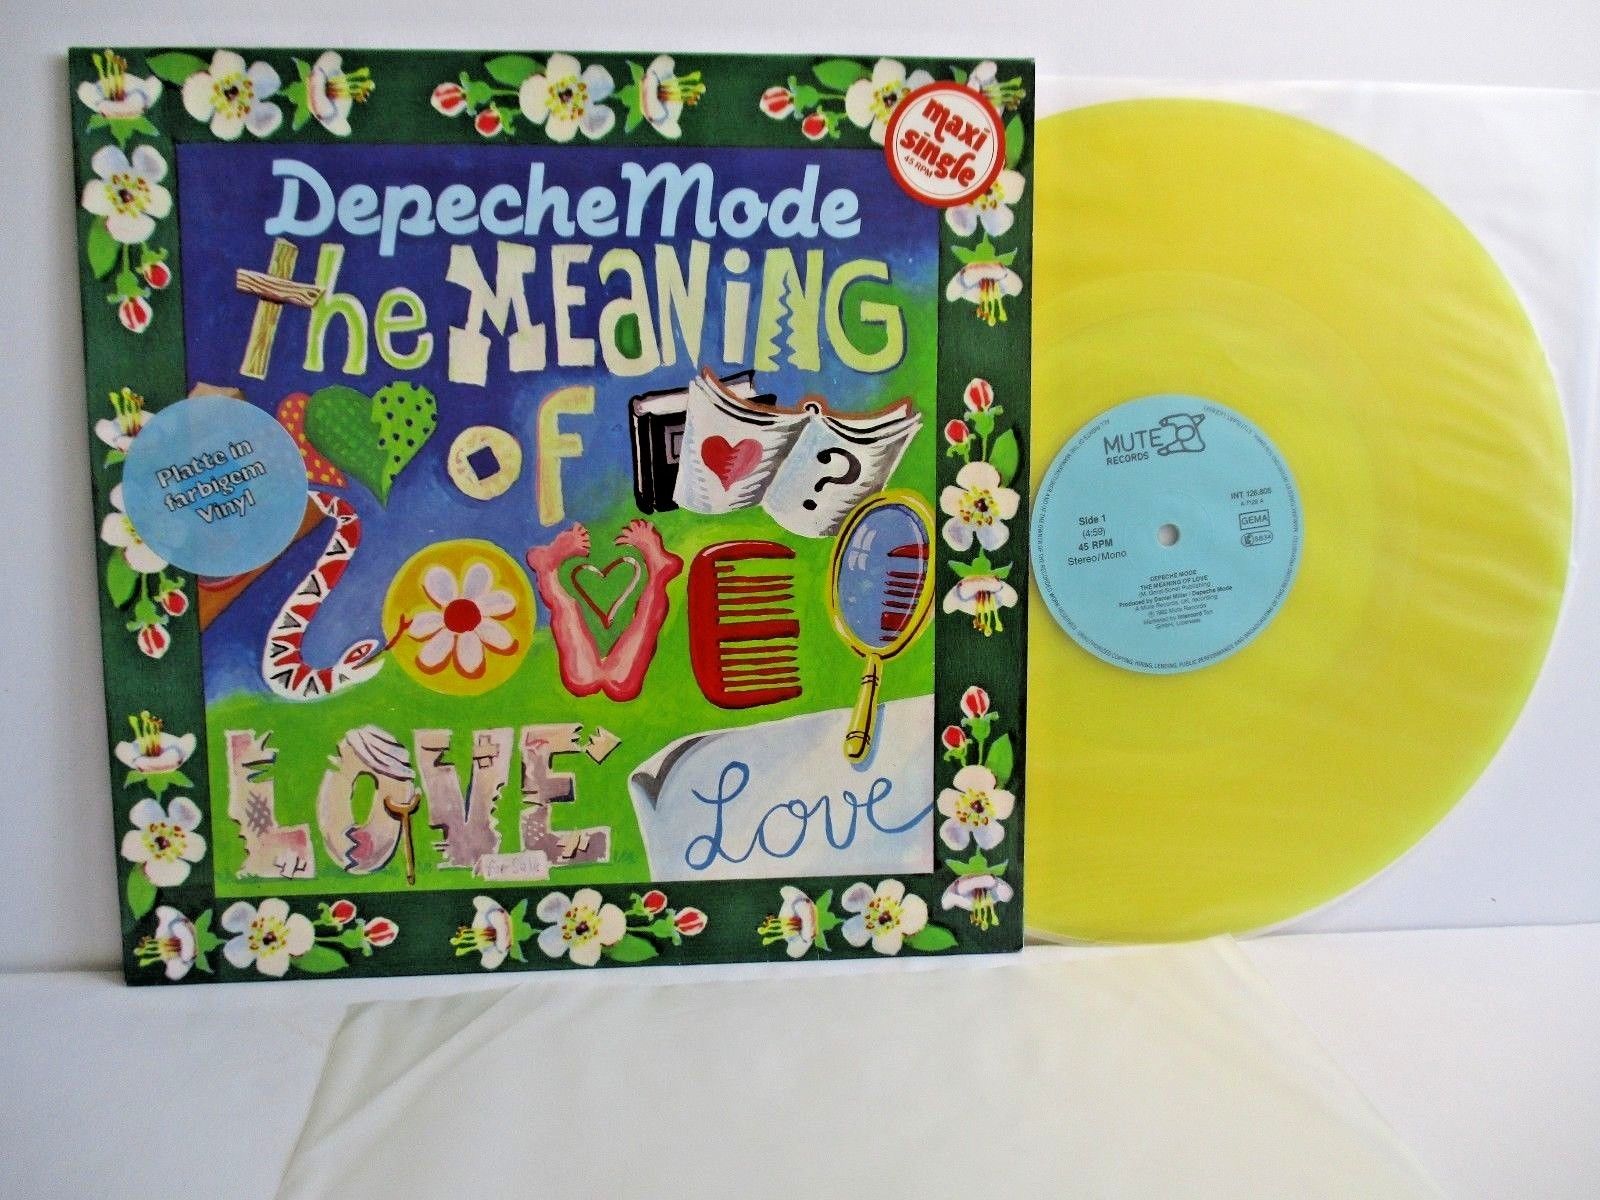 popsike.com - DEPECHE MODE meaning of love 12" Yellow Vinyl GERMANY MUTE  INT 126.805 - auction details